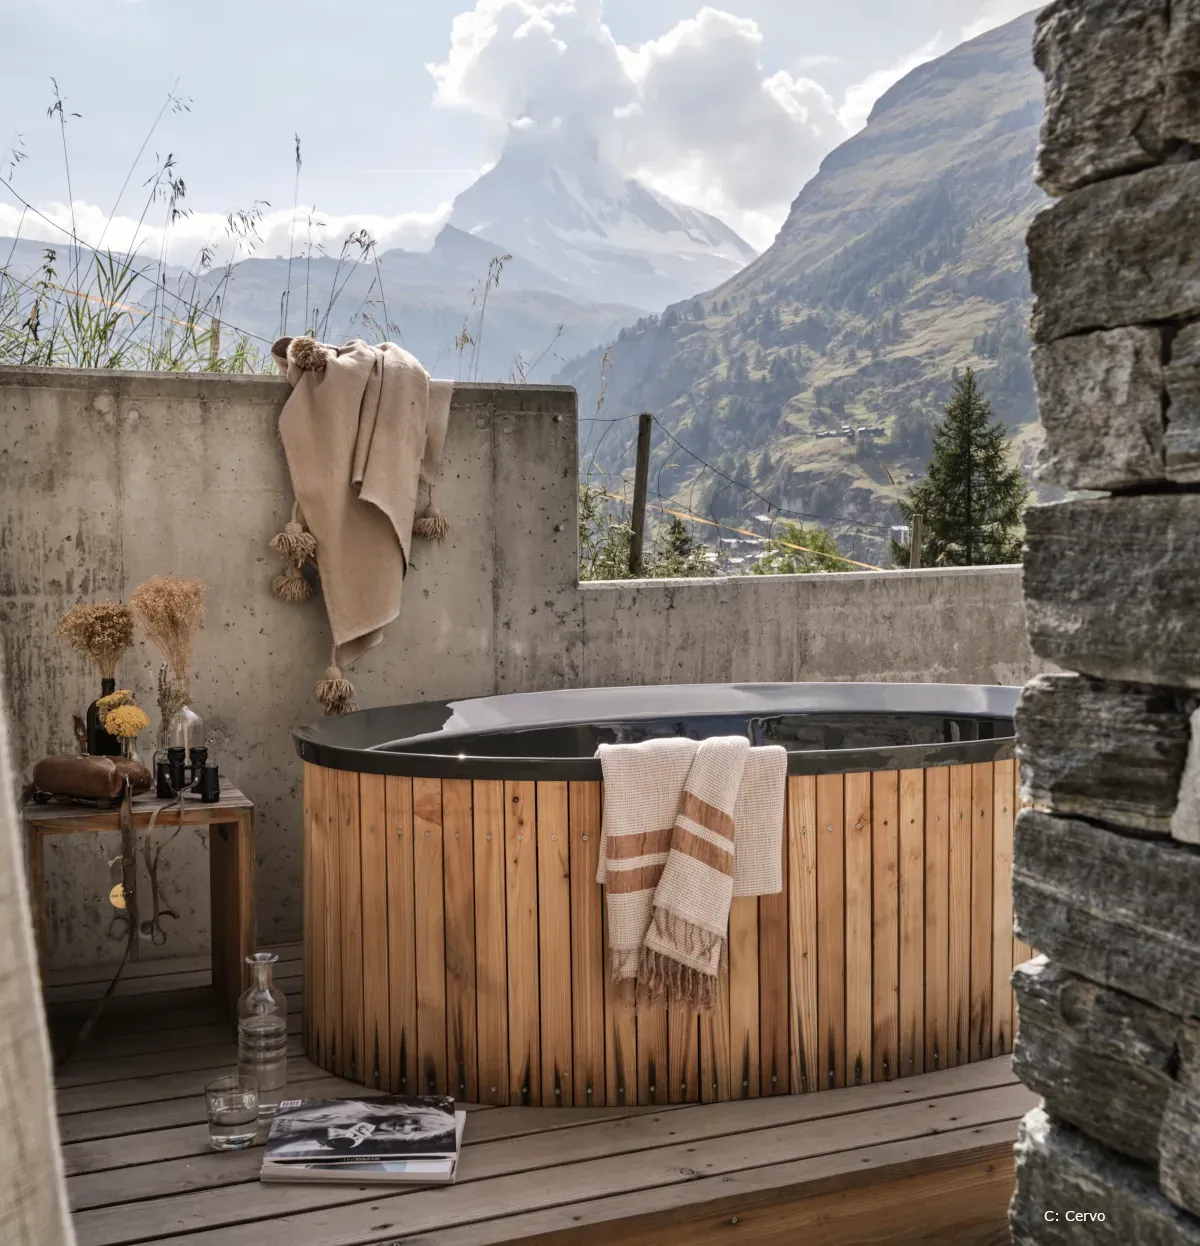 Hot tub with view of Matterhorn